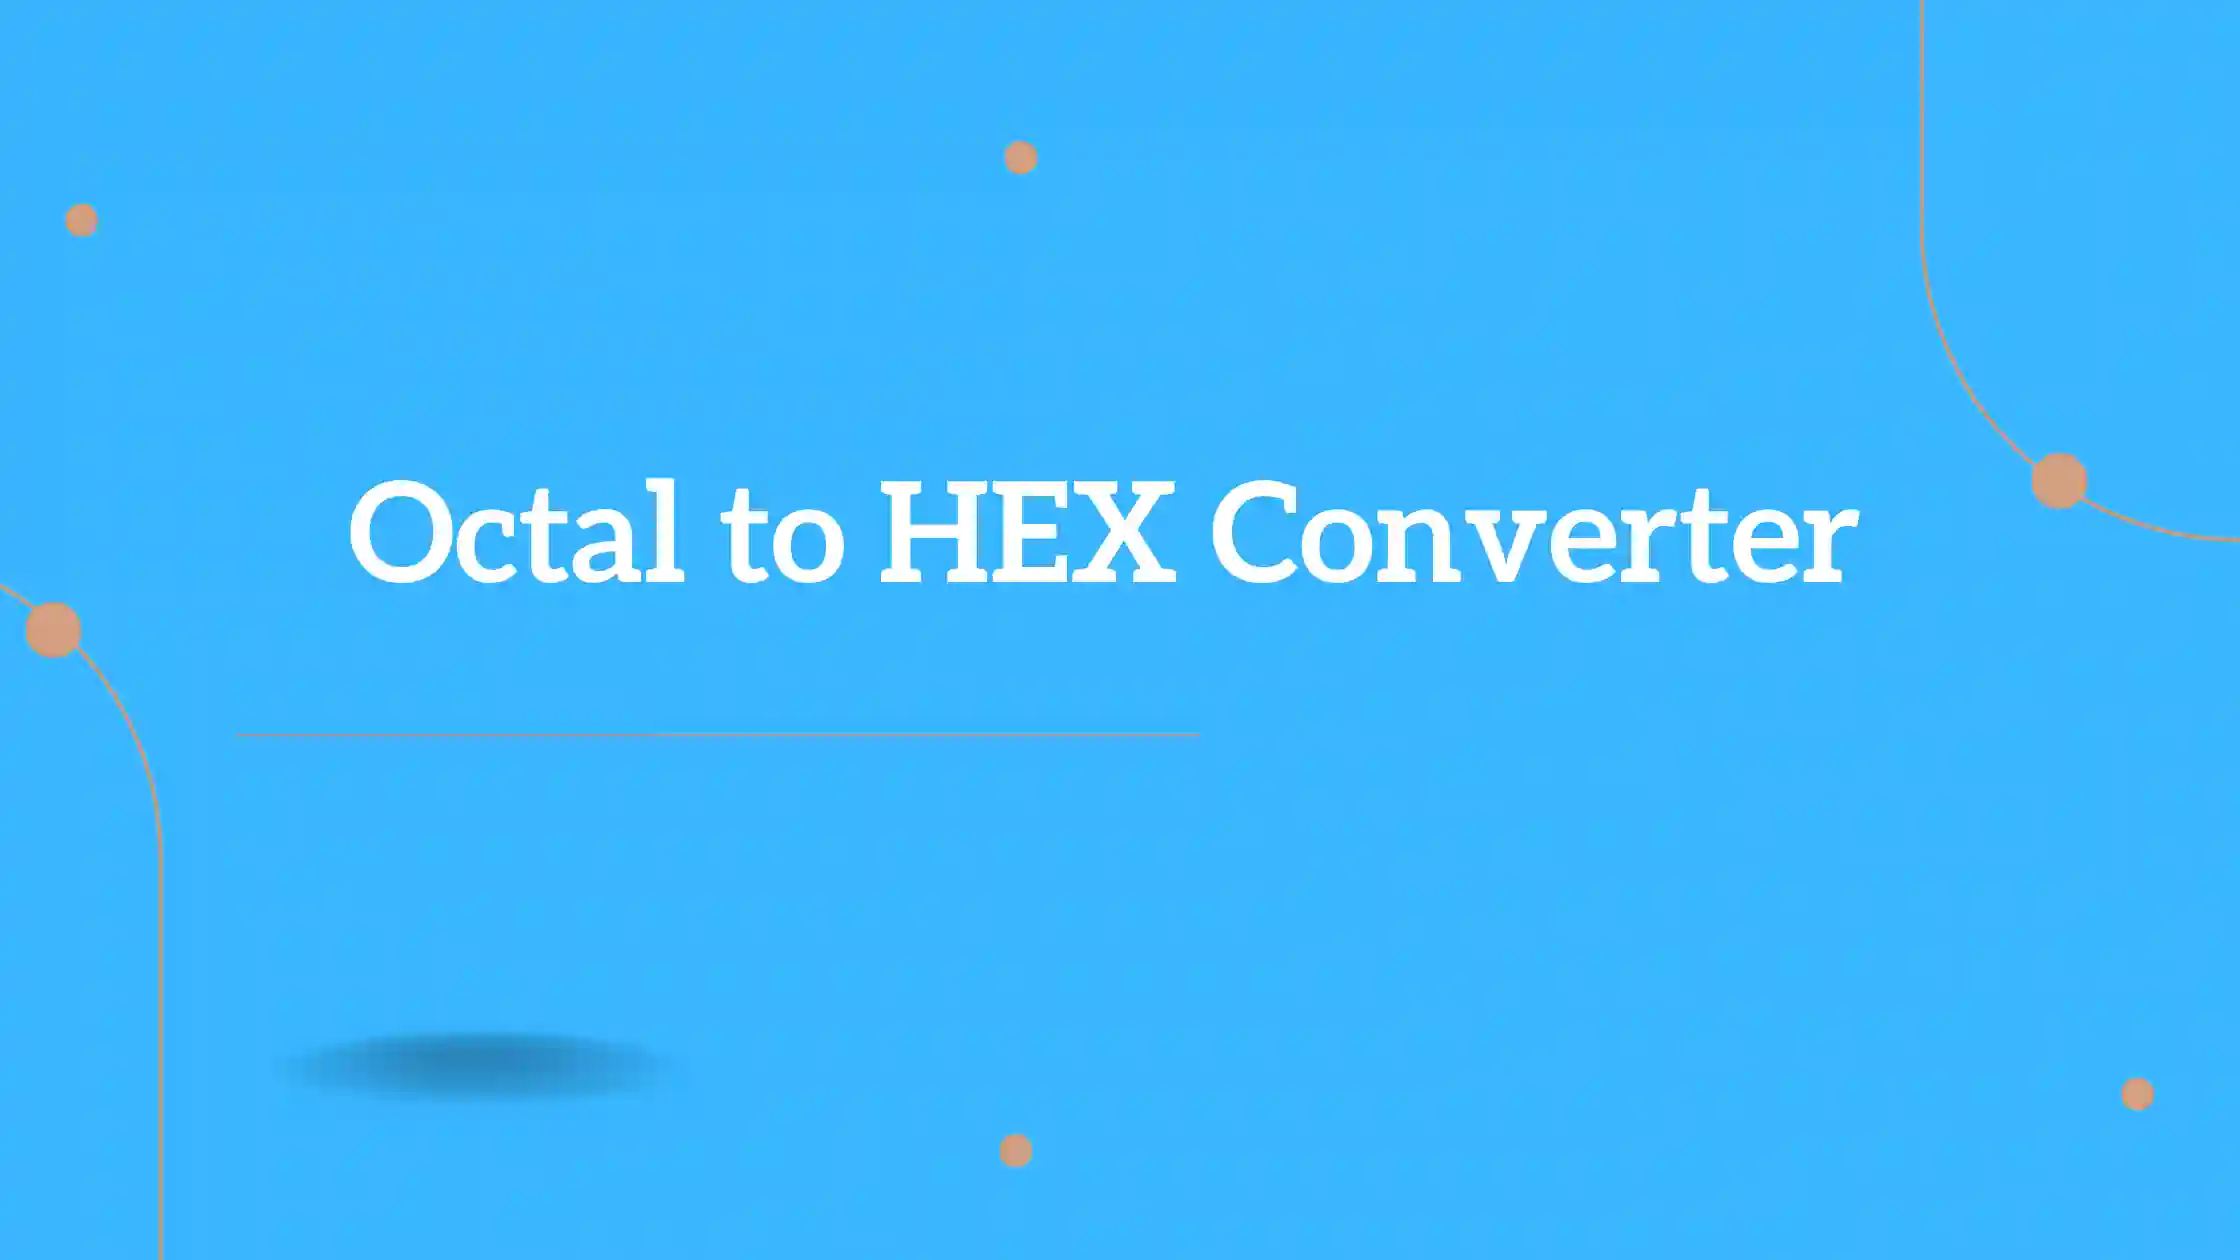 Octal to HEX Converter